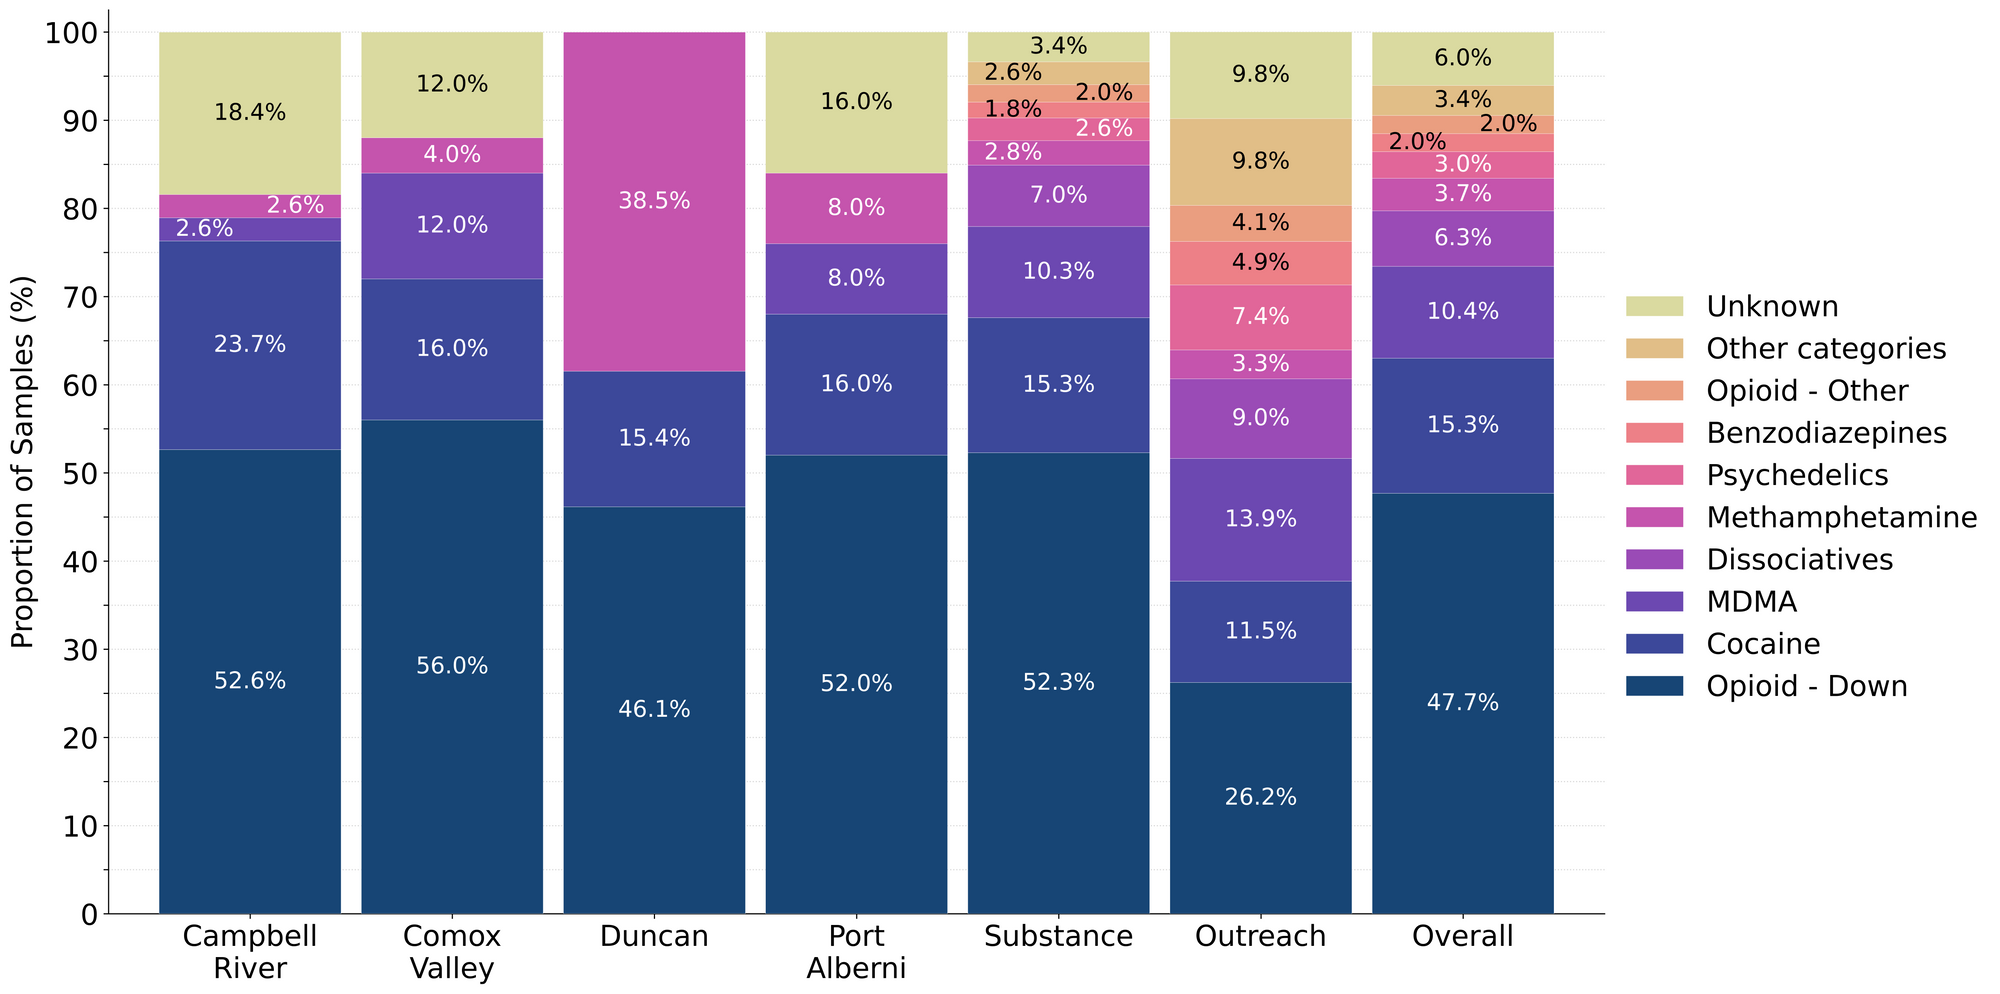 Figure 1. Prevalence of drug classes checked during February split by sample collection/method. Bars are stacked by the percentage of samples in each drug class, with the individual percentages overlaid. Drug classes which represent less than 1% of a given location’s total do not have their percent overlaid onto the bar.